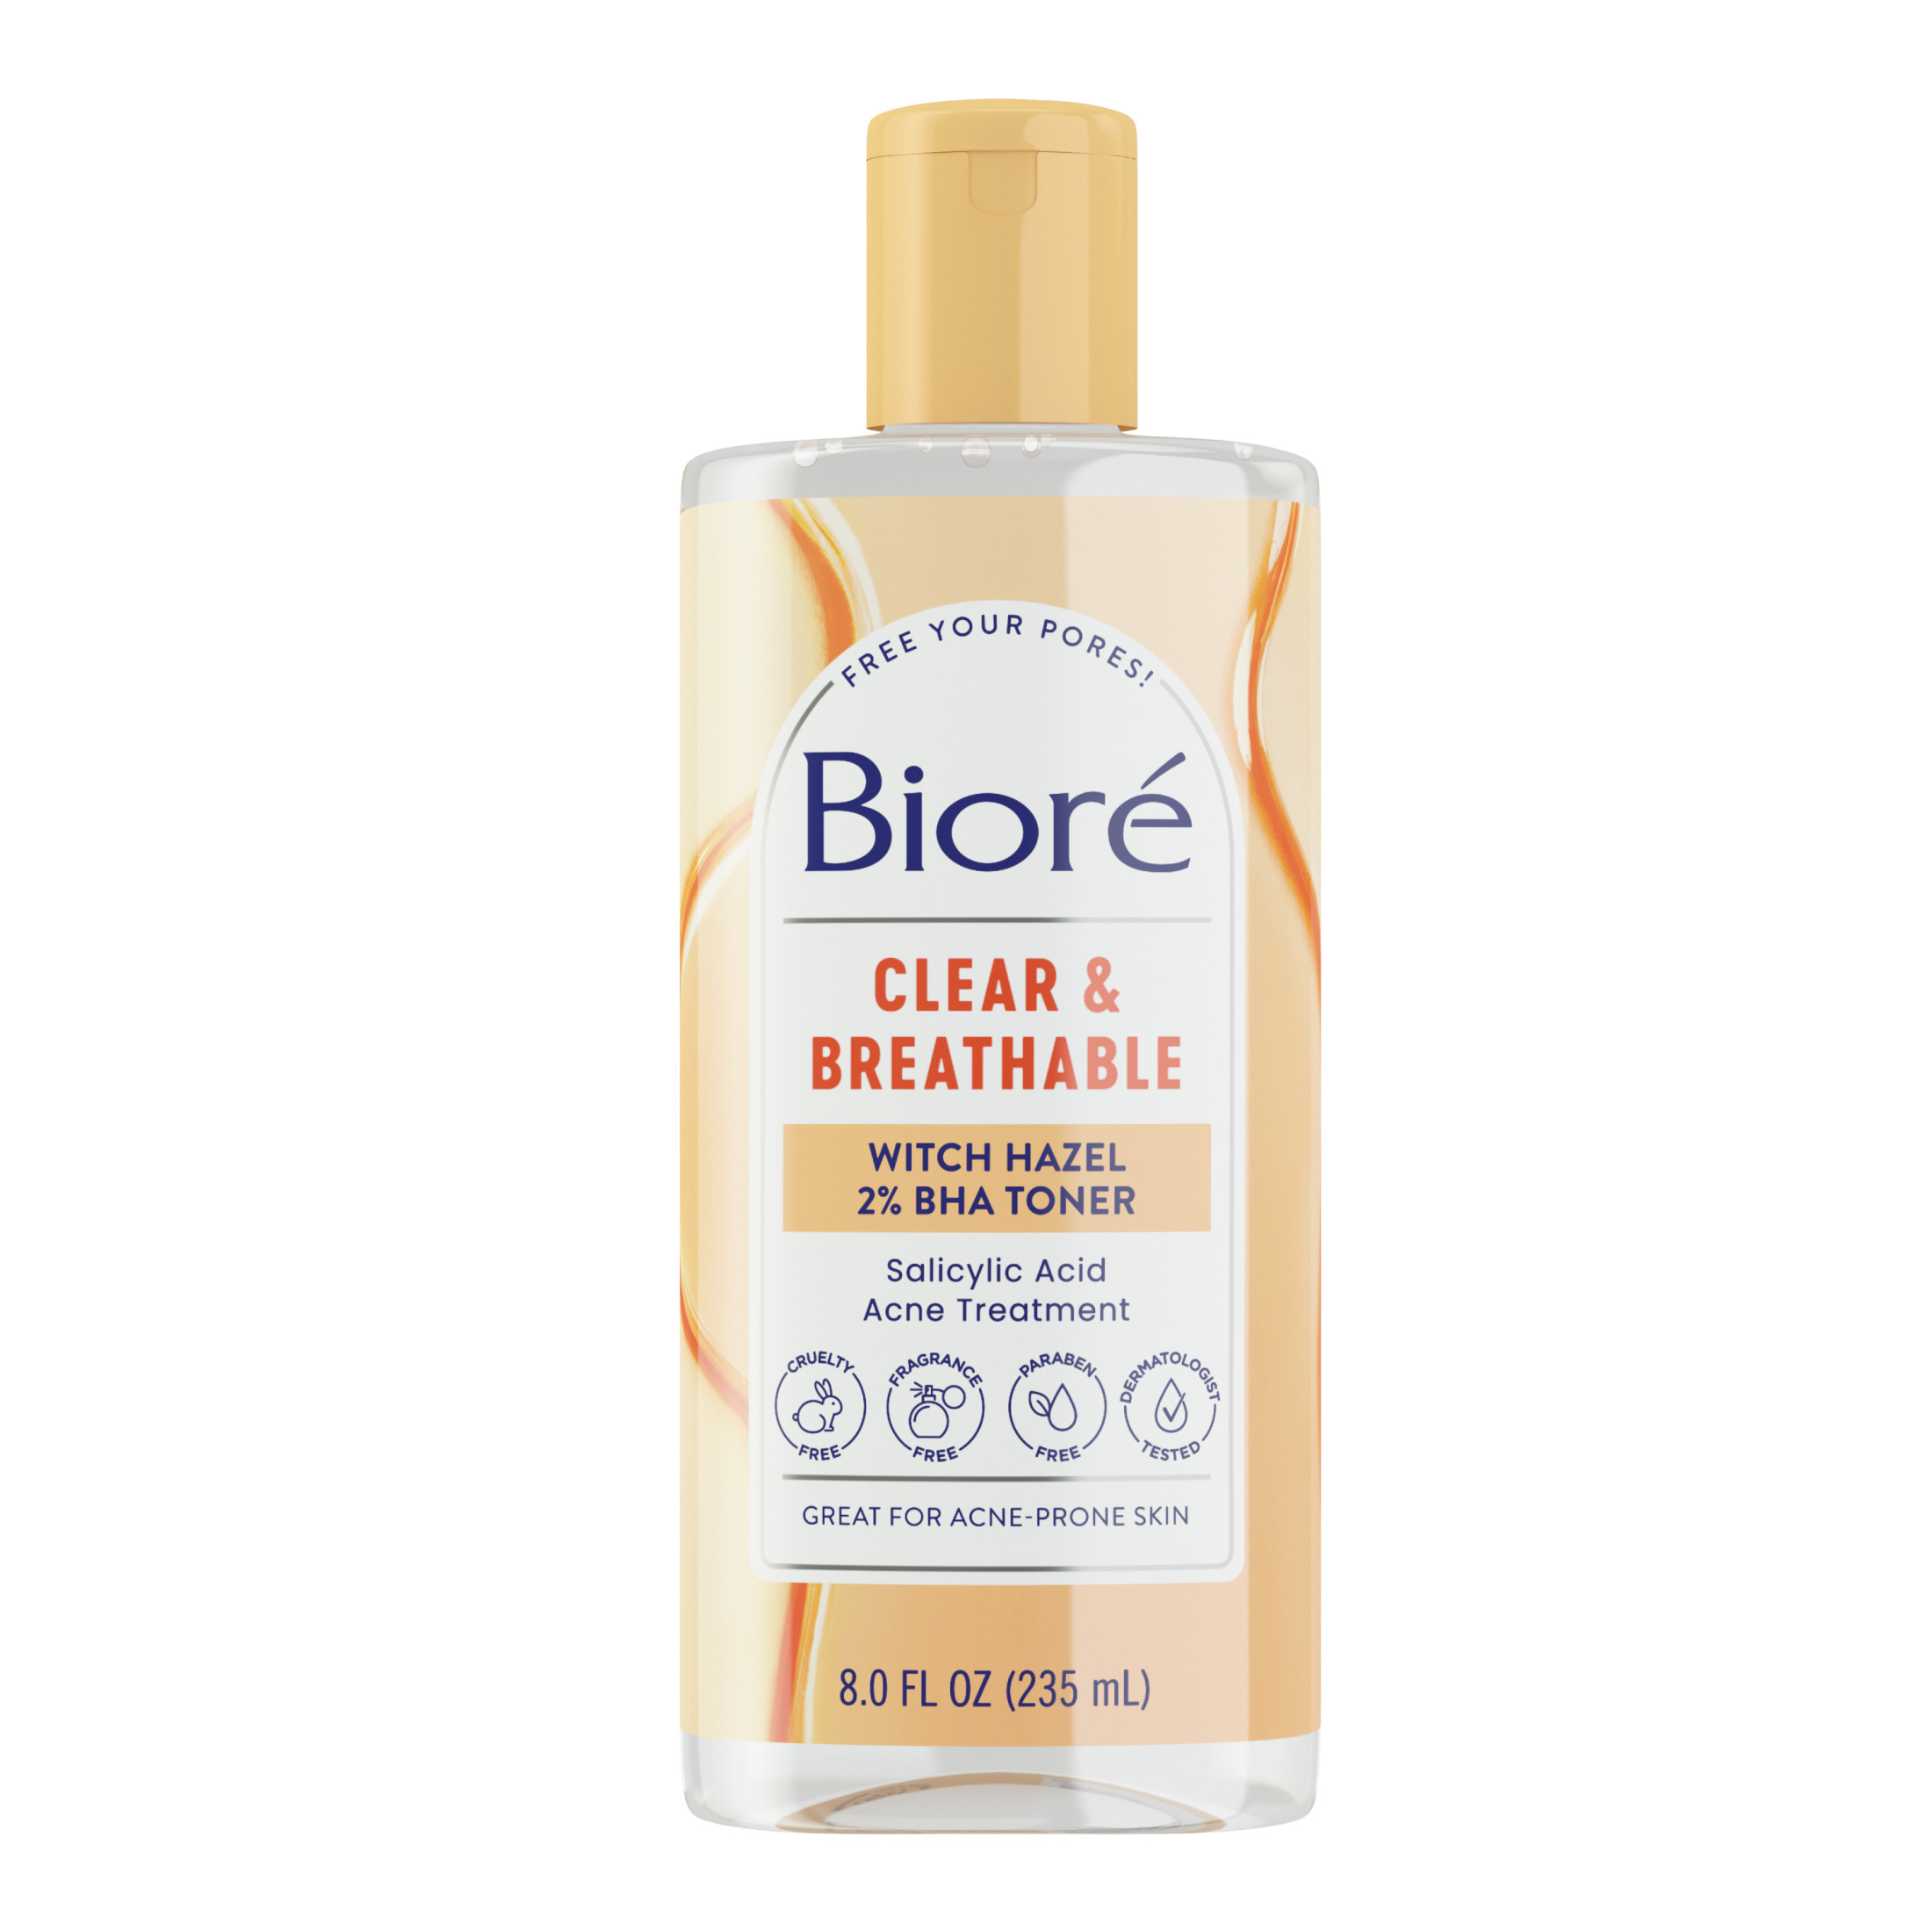 Biore Clear & Breathable Witch Hazel Facial Toner, Toner for Acne Prone Skin, 8 fl oz (HSA/FSA Approved) - image 1 of 10